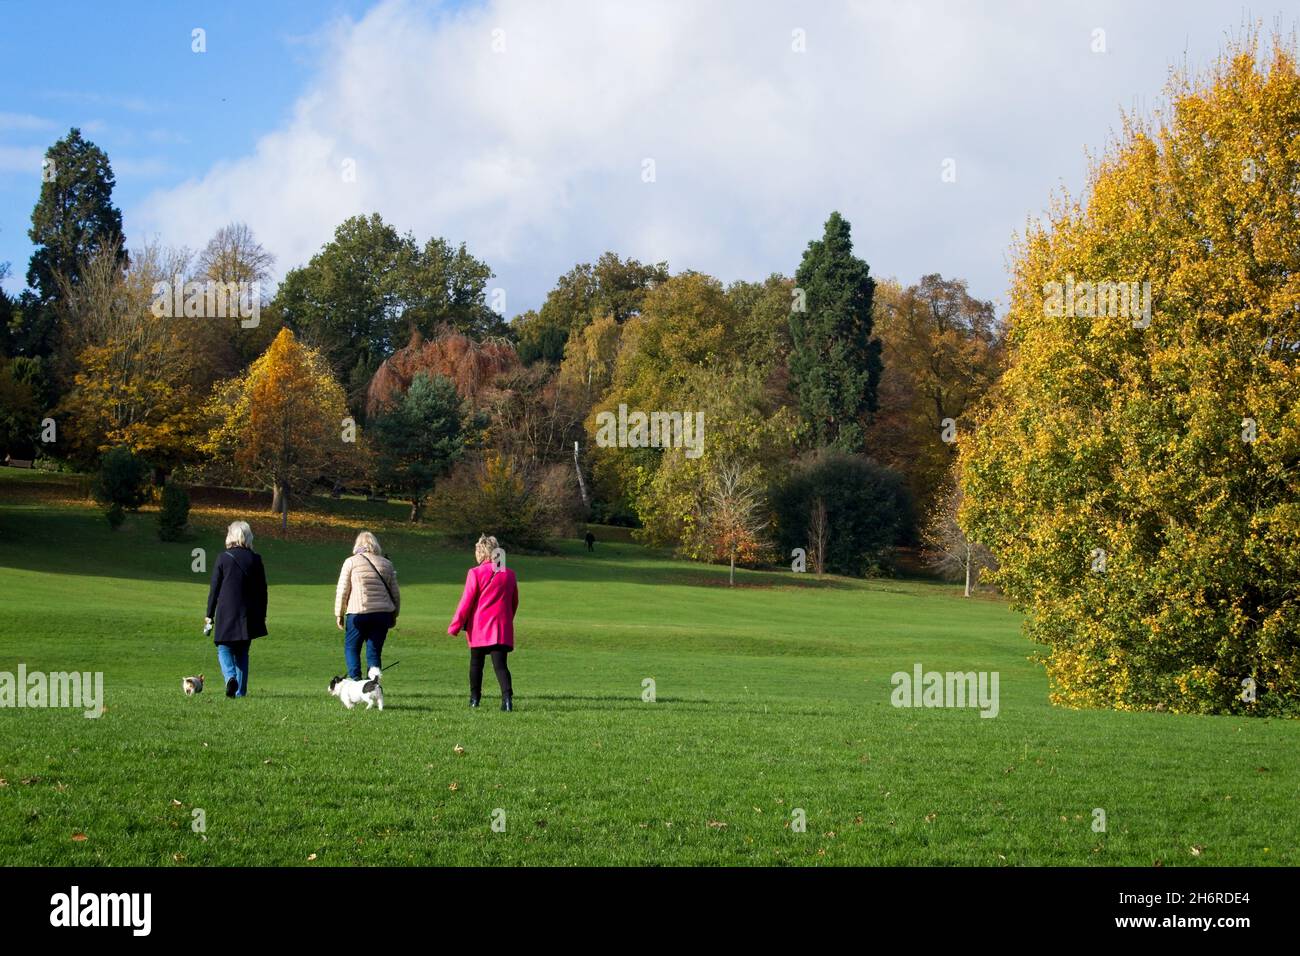 Three women walking their dogs across green grass in Darley Park, an urban park on the banks of the River Derwent in Derby City. Stock Photo